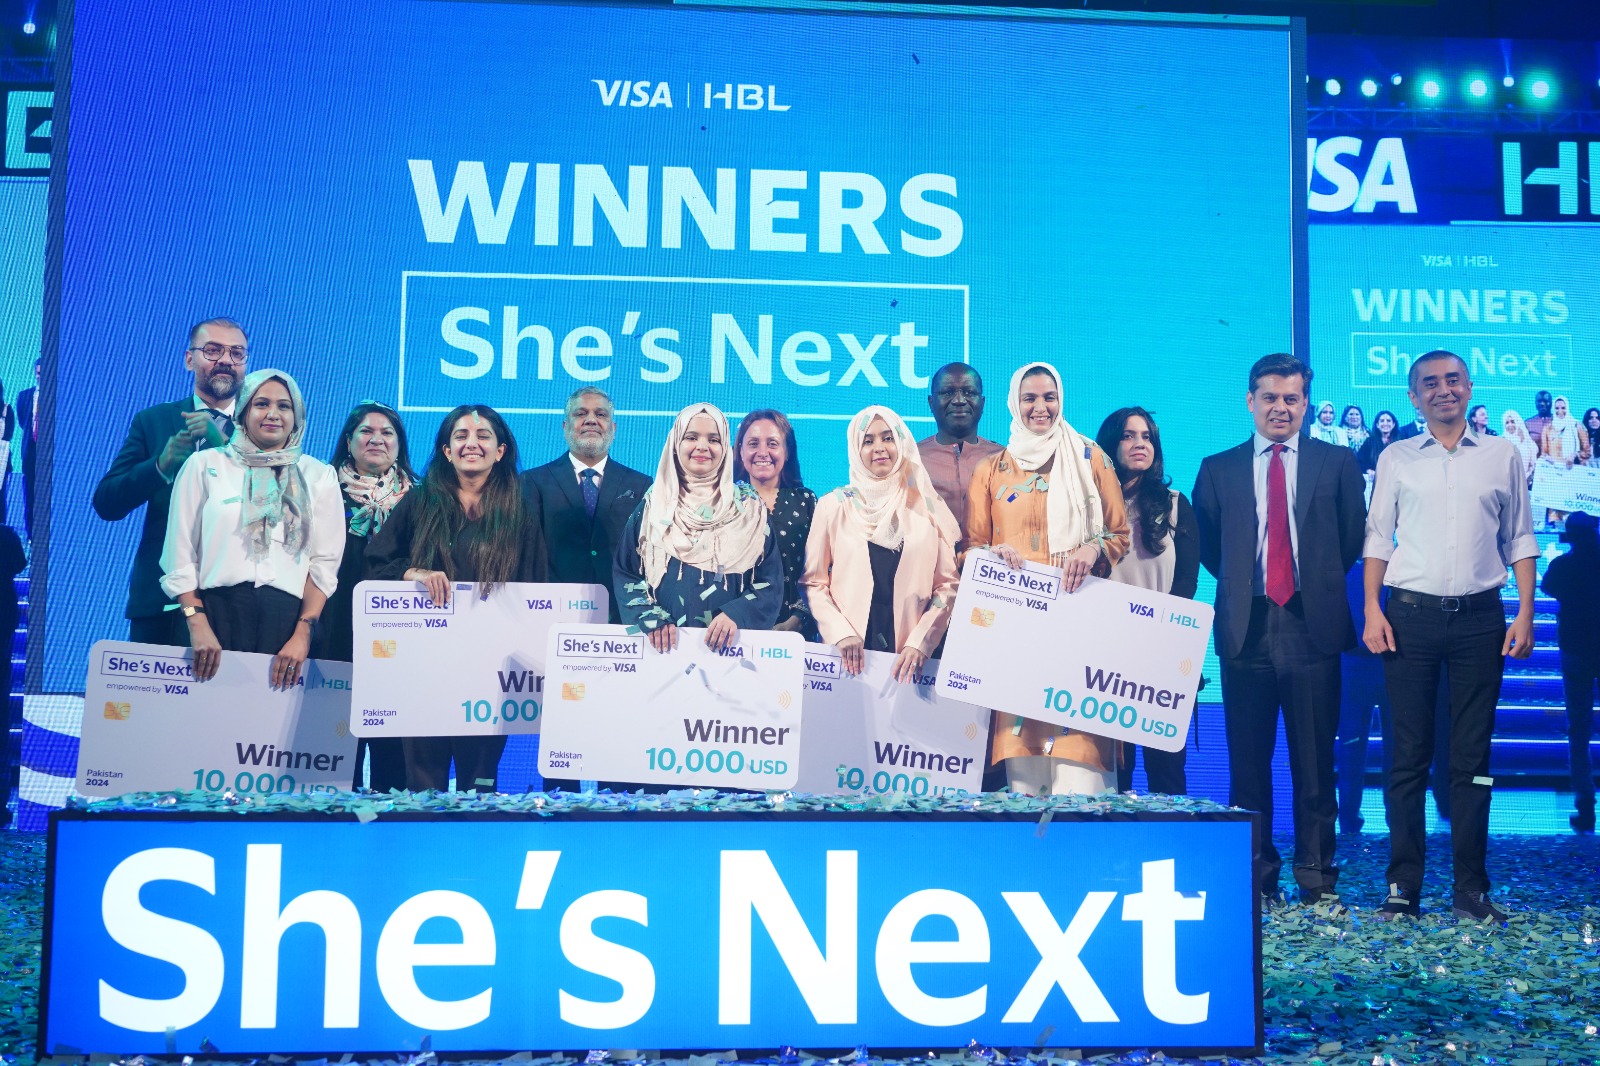 HBL and Visa announce Winners of First Edition of She’s Next program in Pakistan